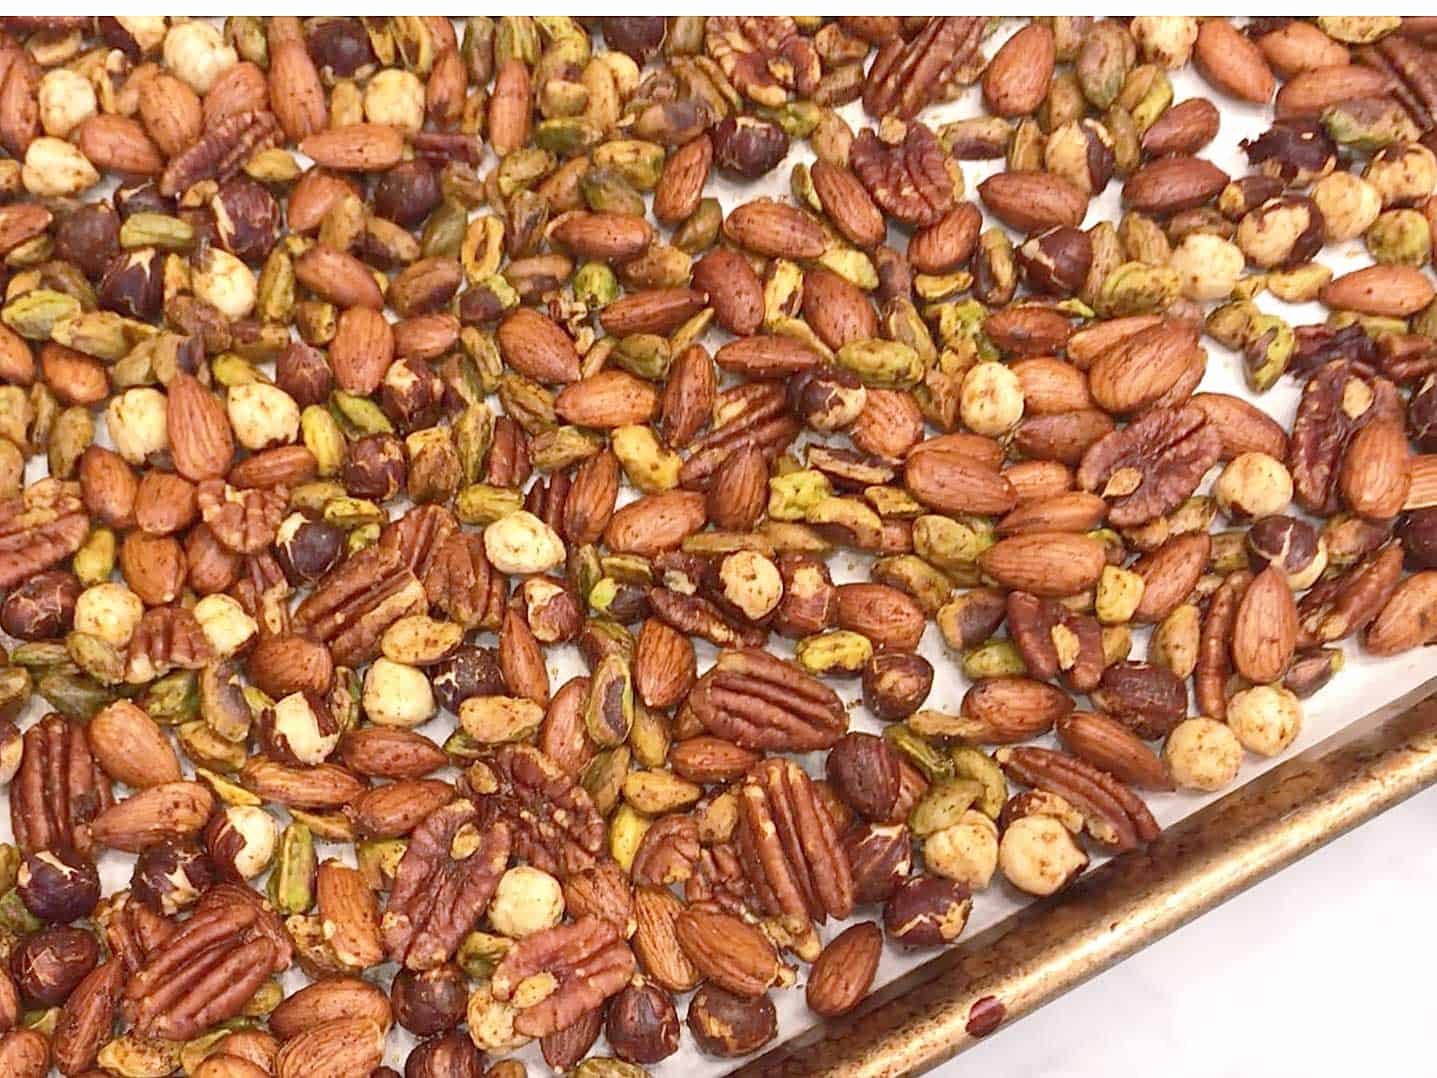 The roasted nuts are ready in the pan.